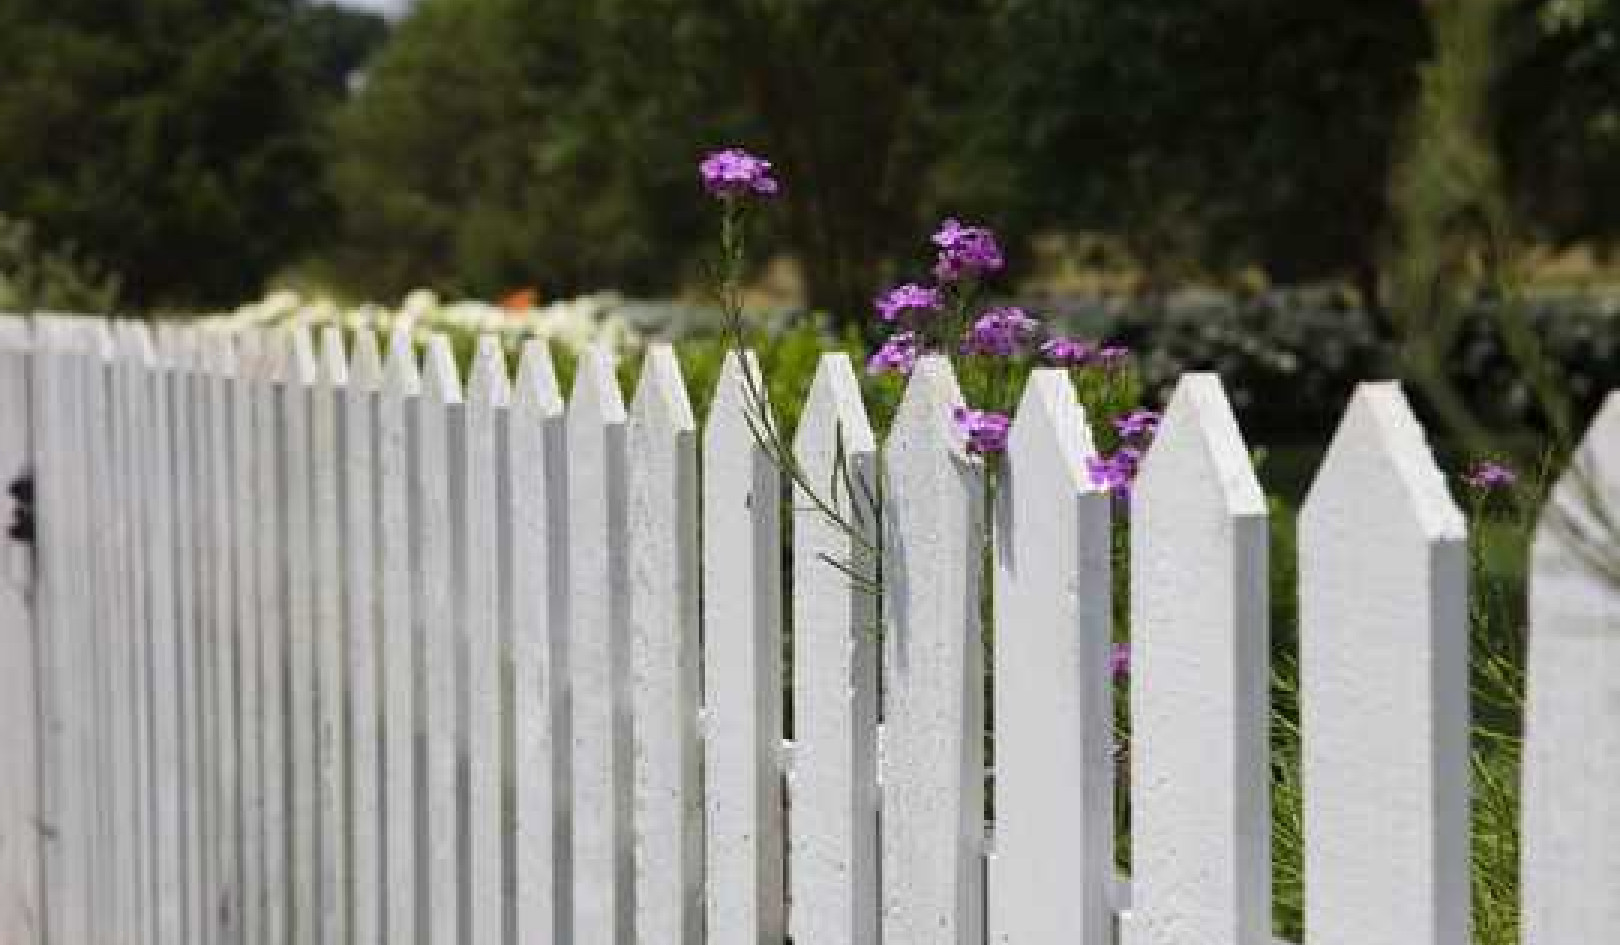 Demolish Your Front Fence. It Would Be An Act Of Radical Kindness